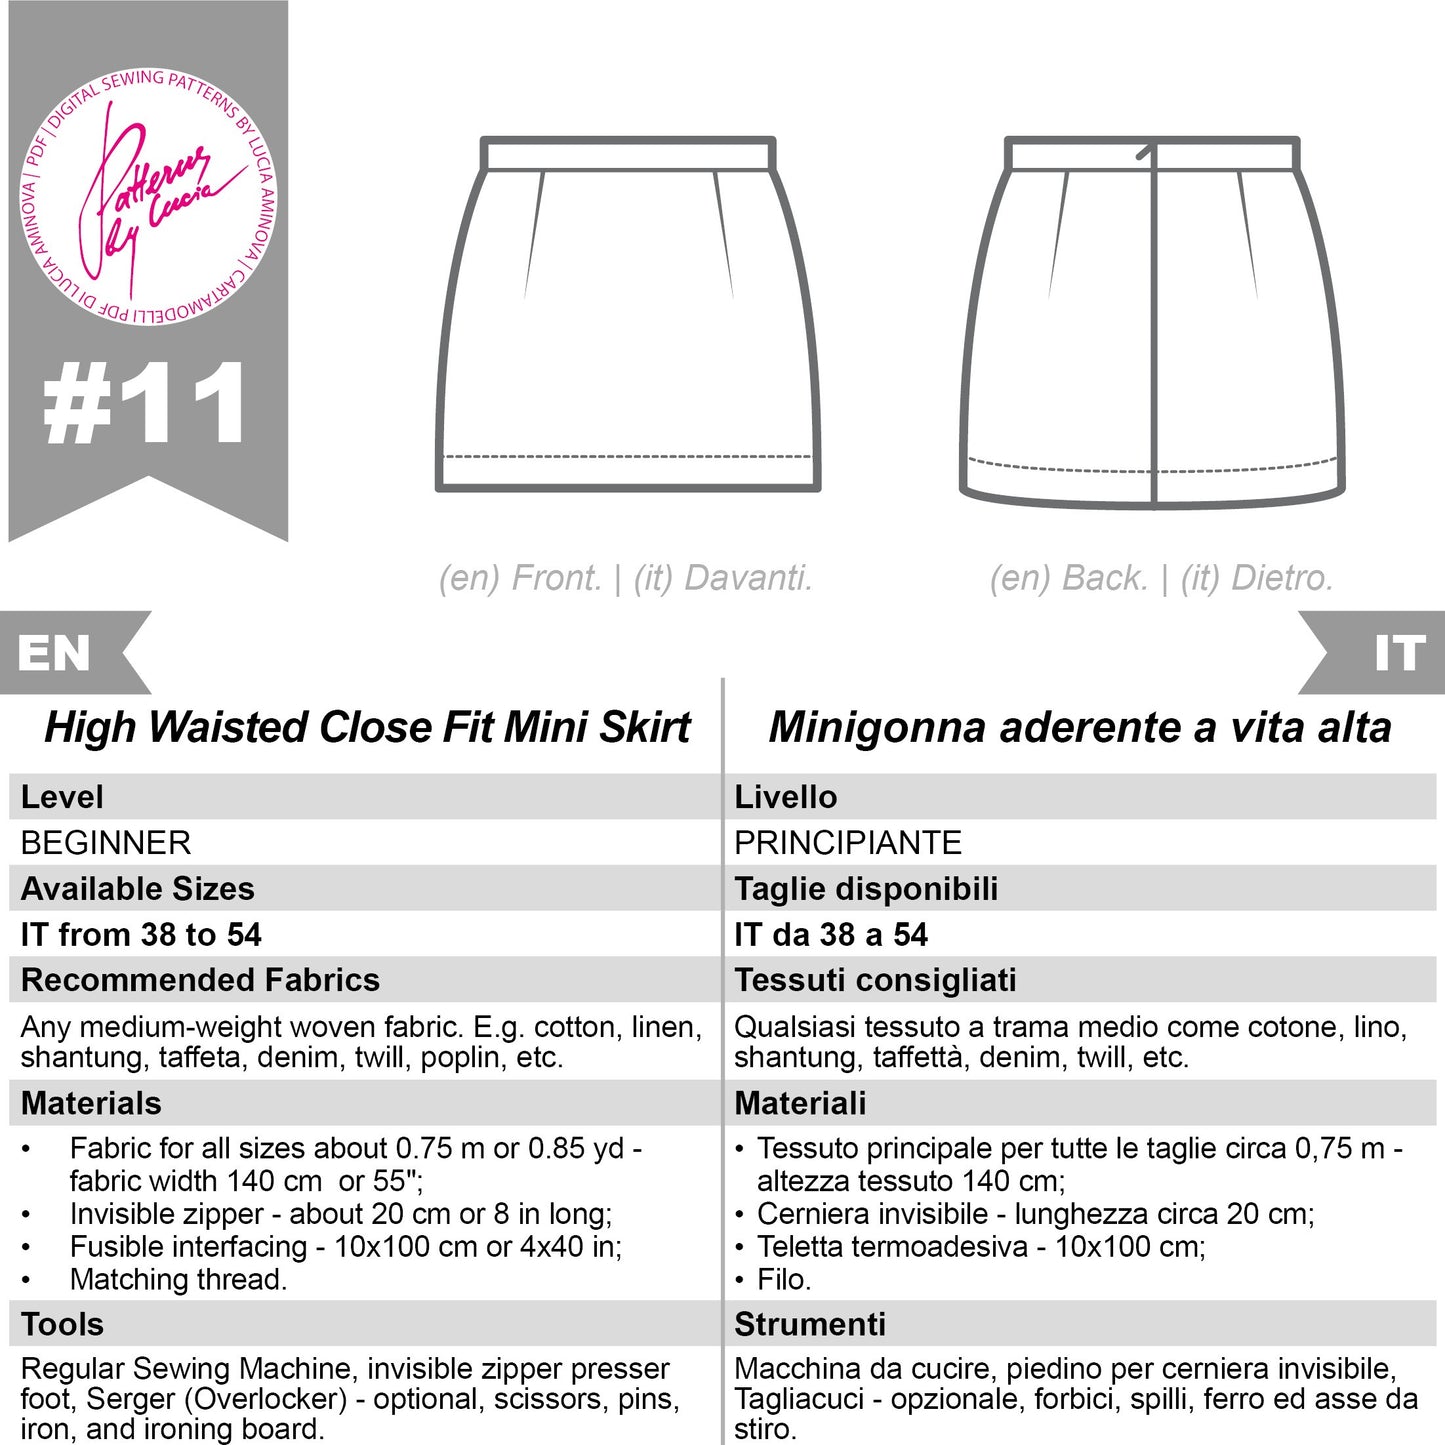 Sewing pattern details such as the pattern number, technical drawing -front and back view, available sizes, the difficulty level of the sewing project, and required fabric and notions.